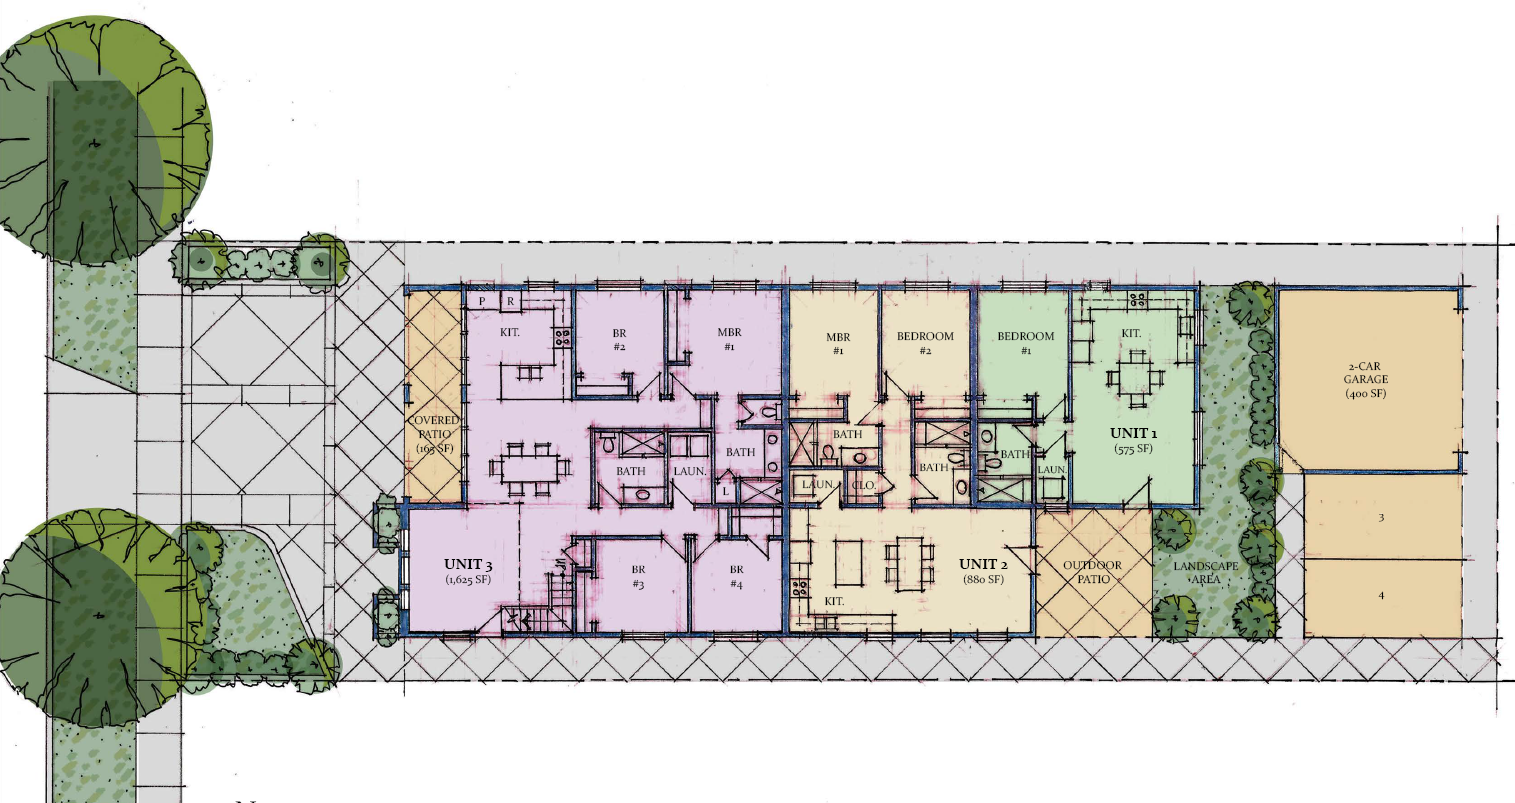 01-yng-architects-on-the-boards-historic-fire-station-plan-option-1.png